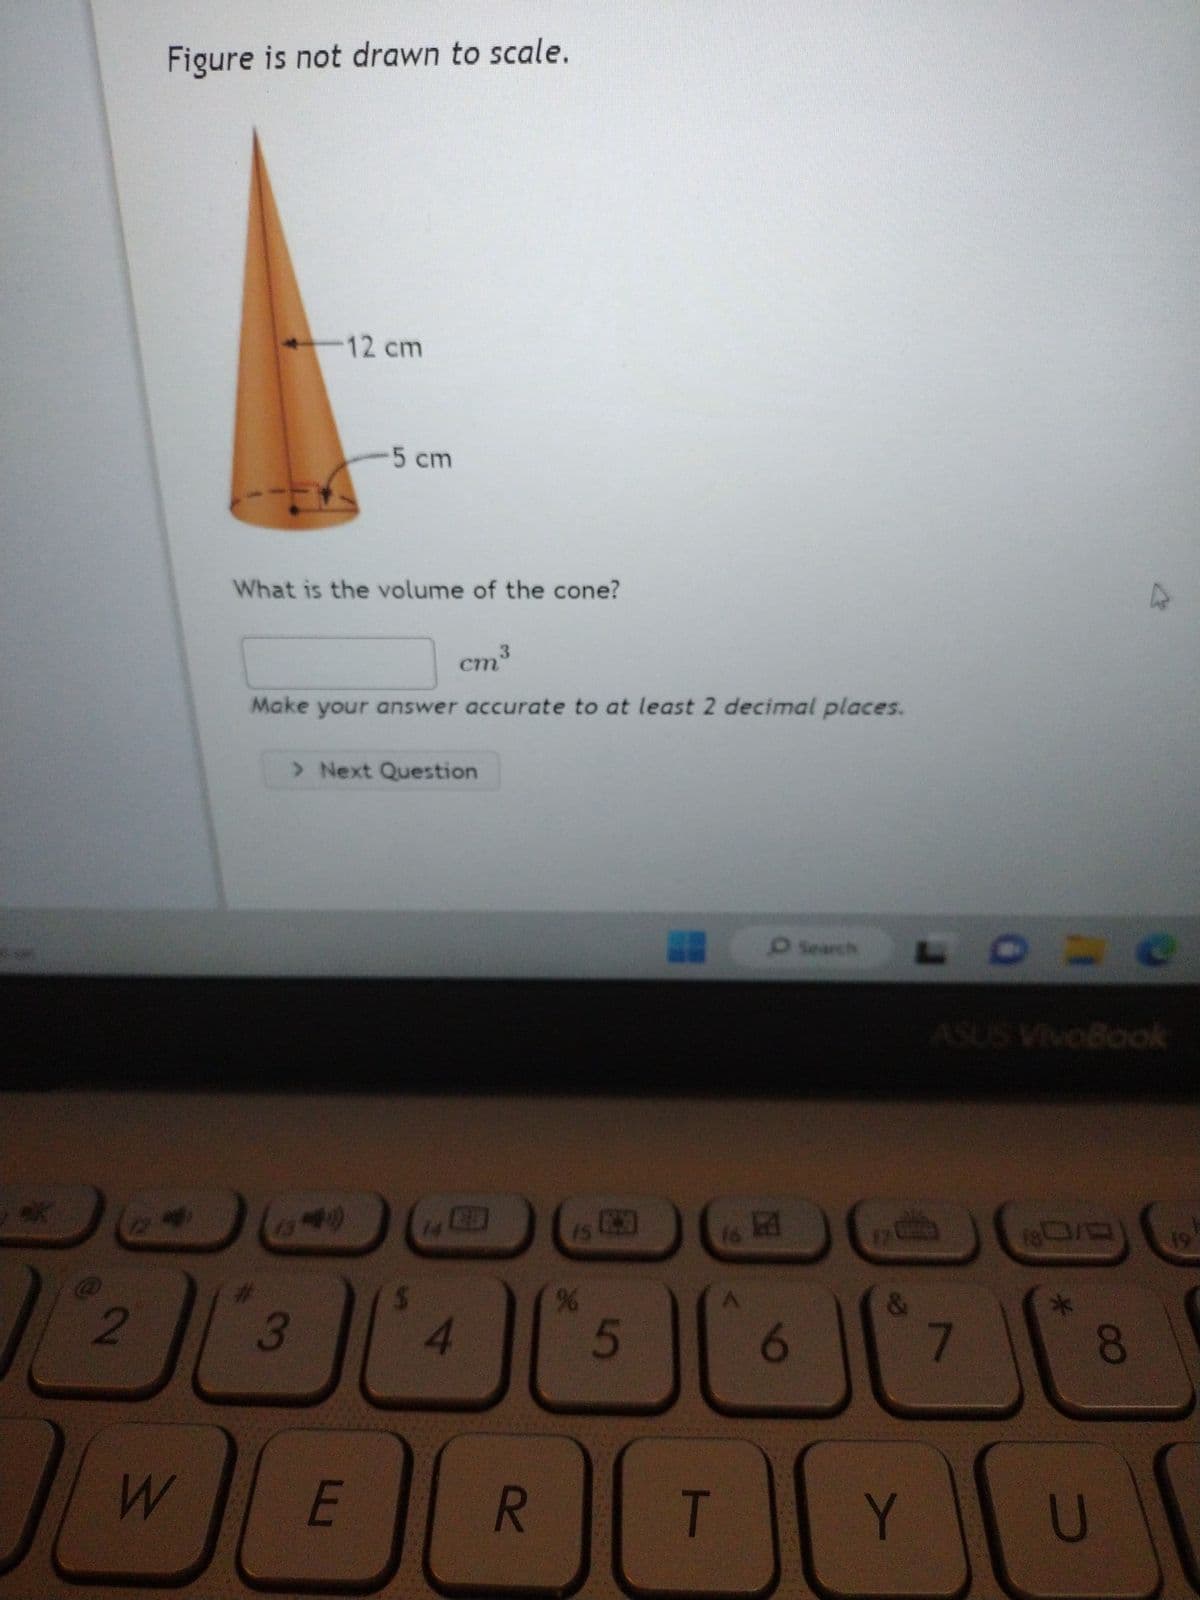 2
Figure is not drawn to scale.
74
W
12 cm
What is the volume of the cone?
3
5 cm
3
cm³
Make your answer accurate to at least 2 decimal places.
E
> Next Question
$
4
R
%
5
A
T
A
F
O Search
Y
7
180/0
*
8
U
M
C
19